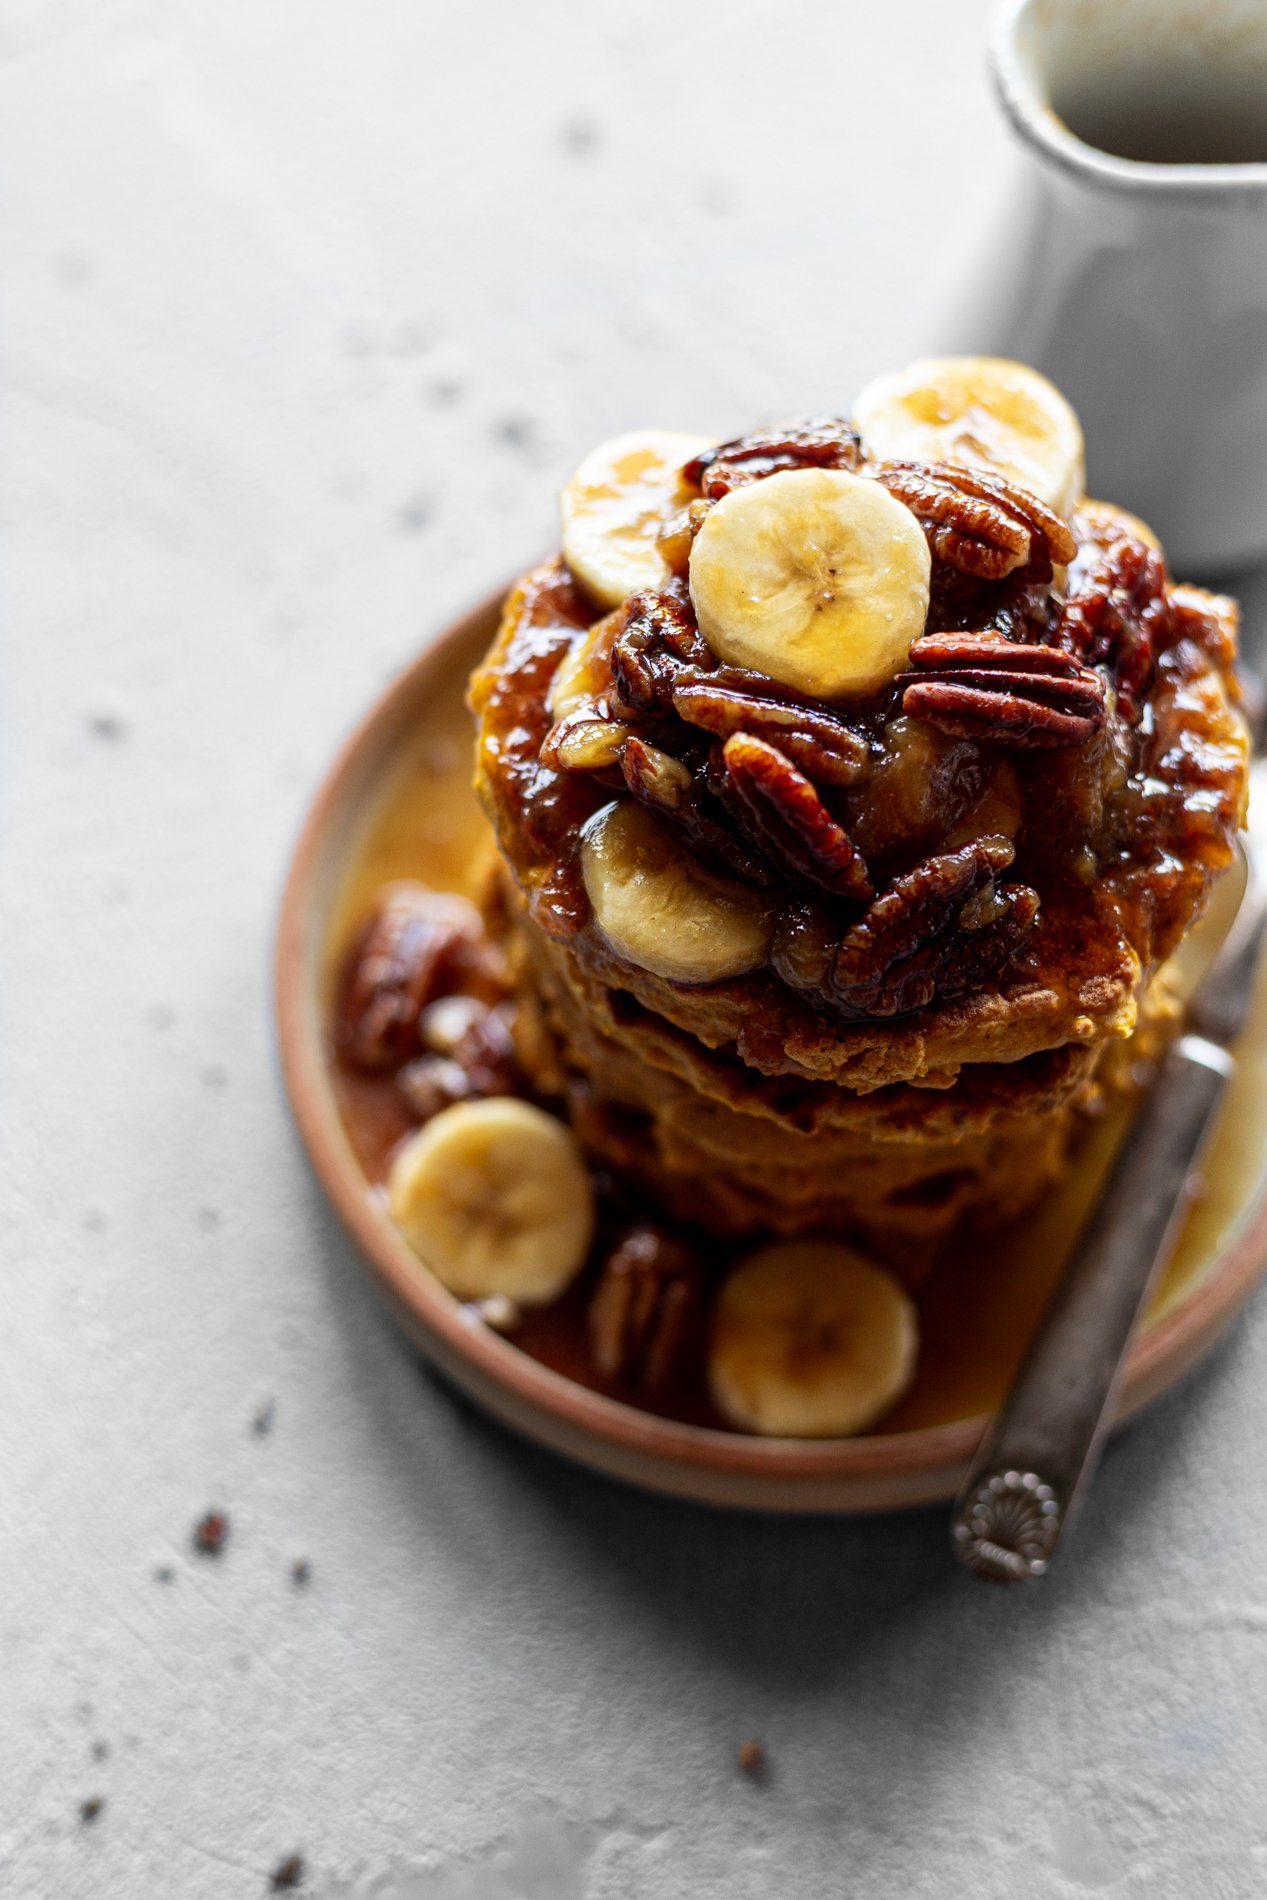 a stack of pumpkin break griddle cakes topped with caramelized bananas and pecans